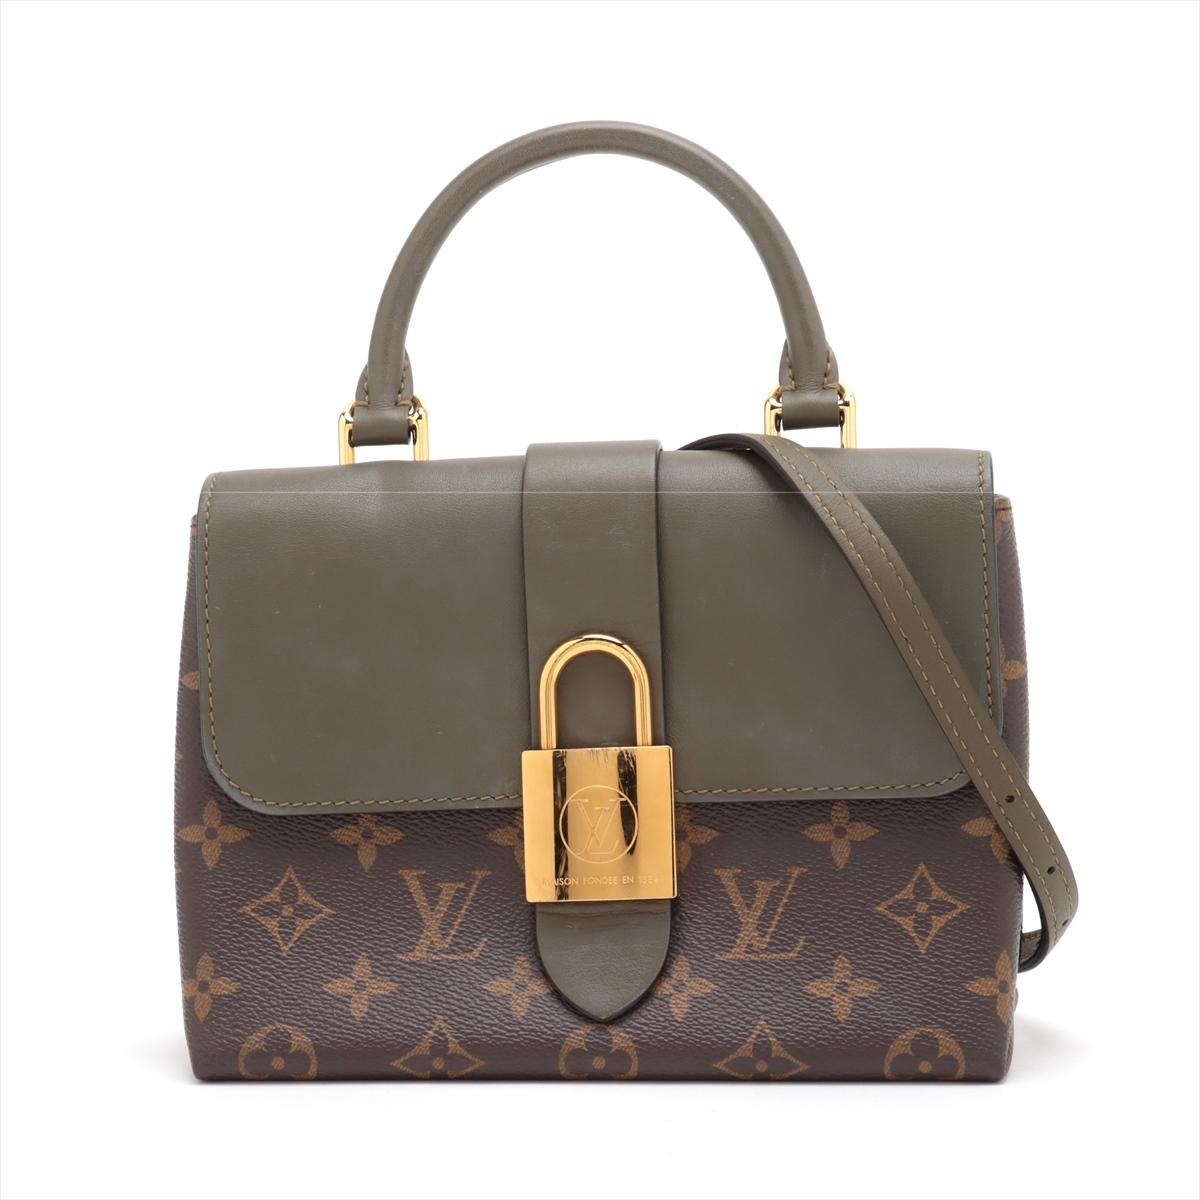 The Louis Vuitton Monogram Locky BB Handbag in Brown Khaki a chic and distinctive addition to the Monogram canvas collection, showcasing a fusion of luxury and contemporary design. The Locky BB features iconic Monogram canvas adorned with a unique